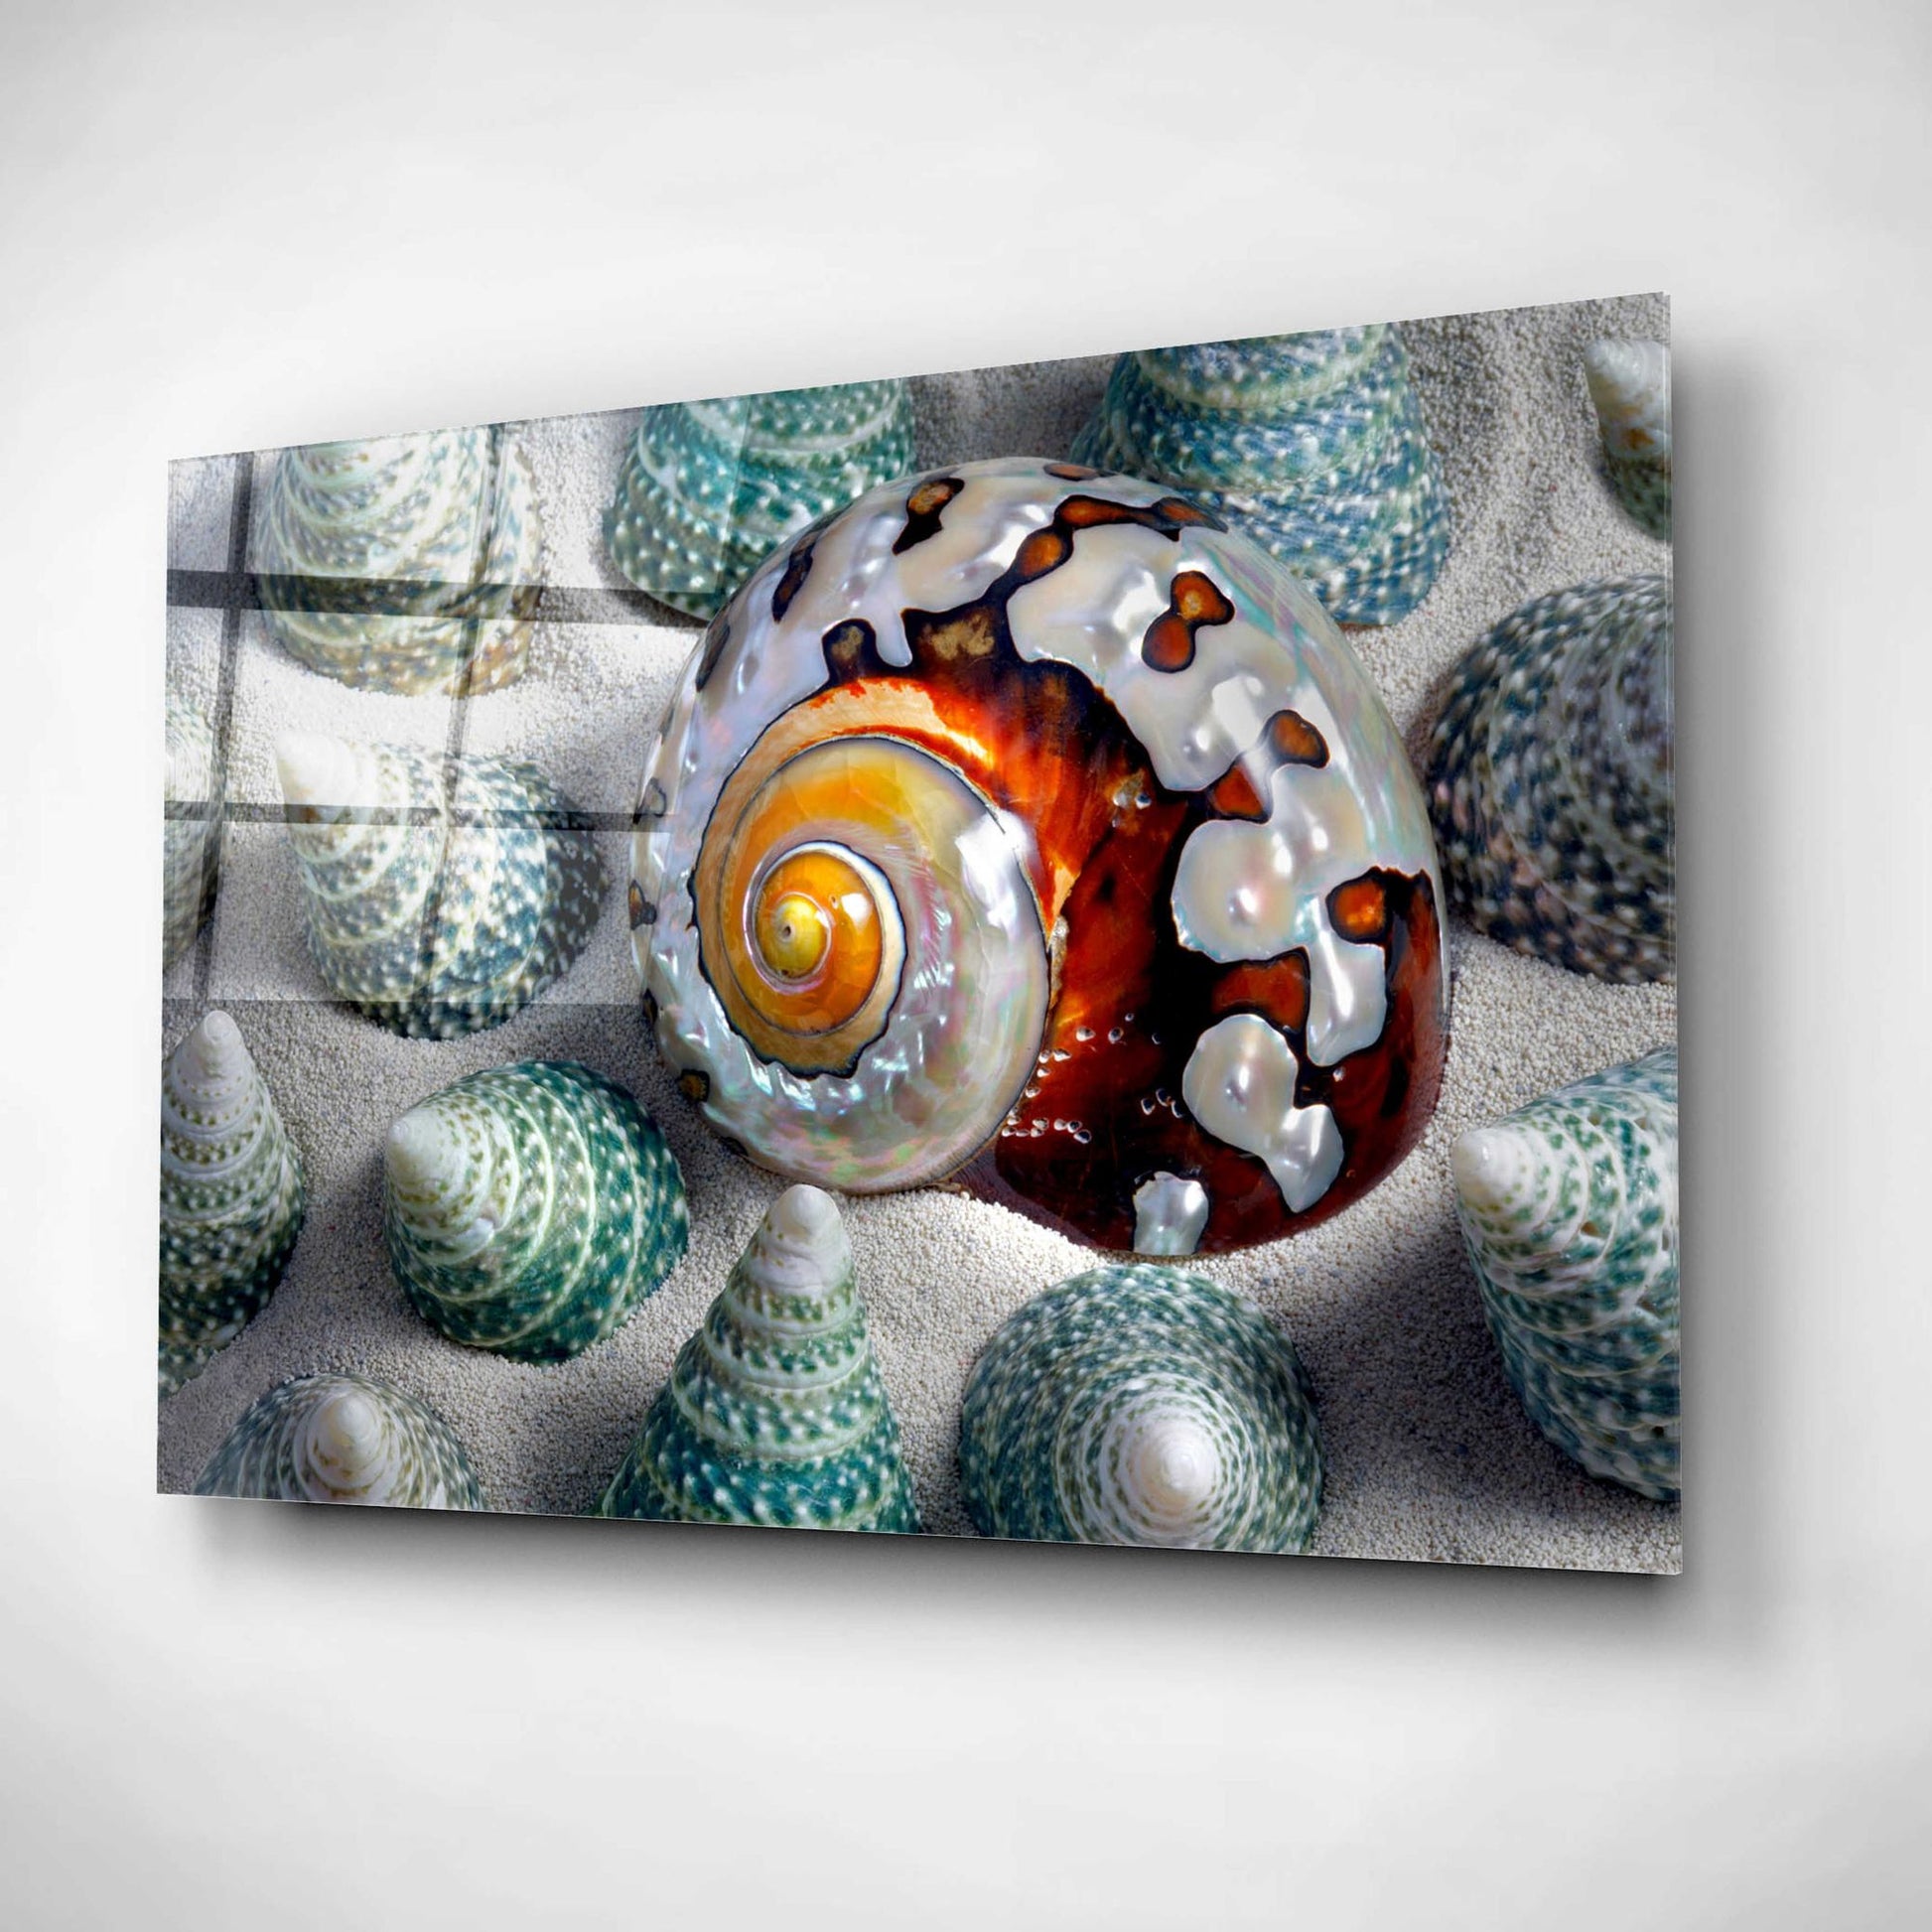 Epic Art 'Shell Spiral' by Dennis Frates, Acrylic Glass Wall Art,24x16